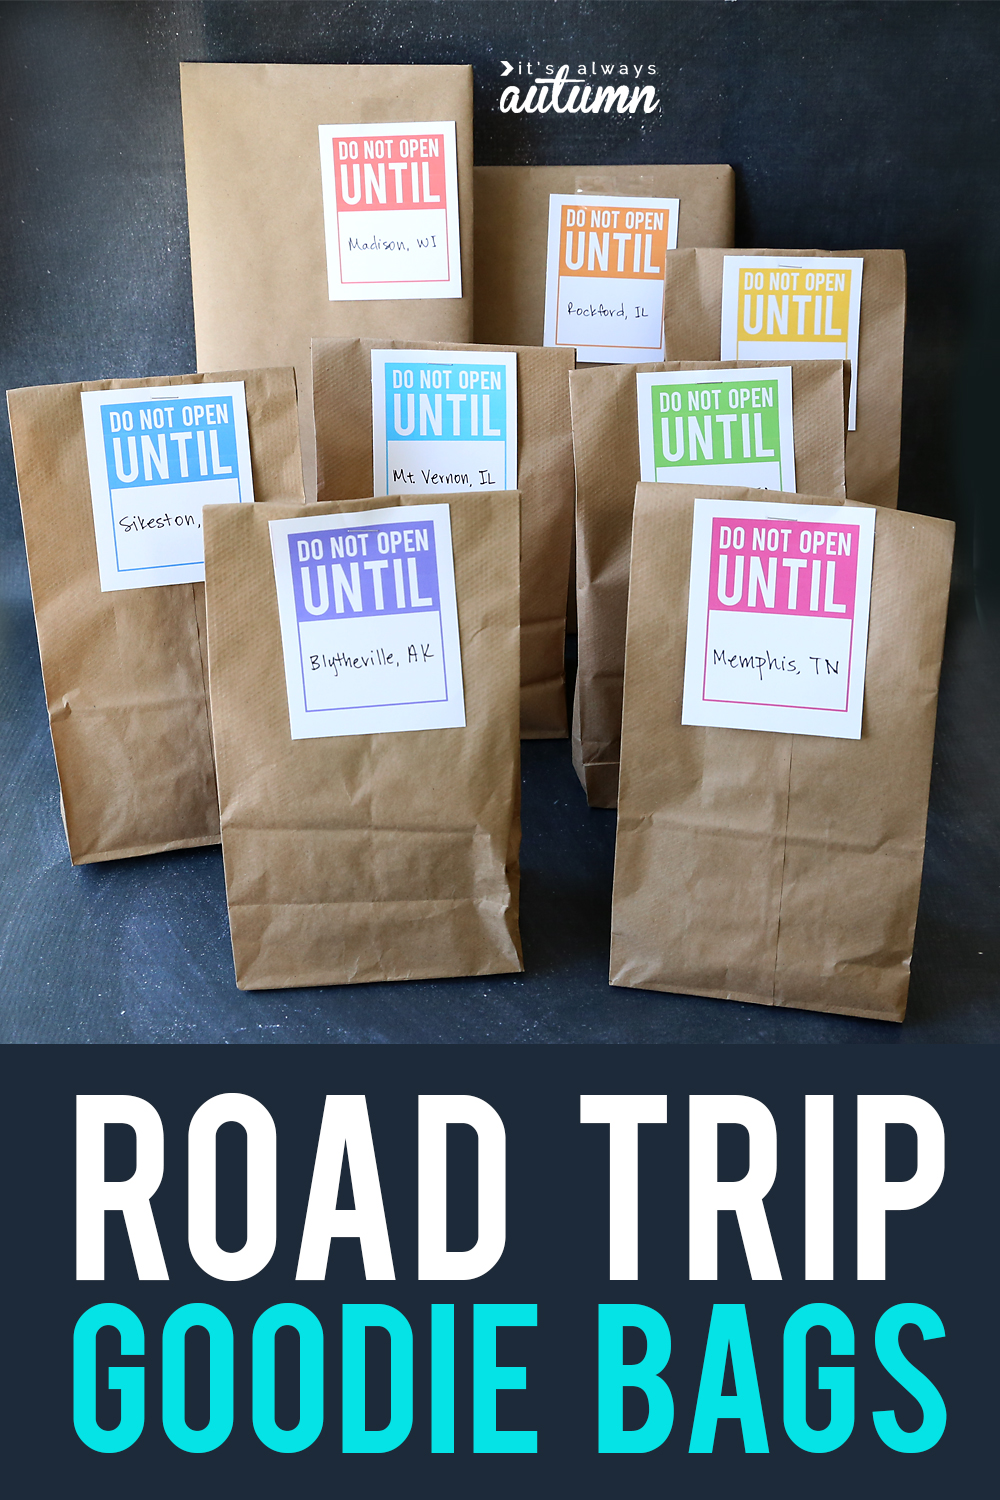 Brown lunch sacks with labels that say \"Do not open until\" on them and words: road trip good bags